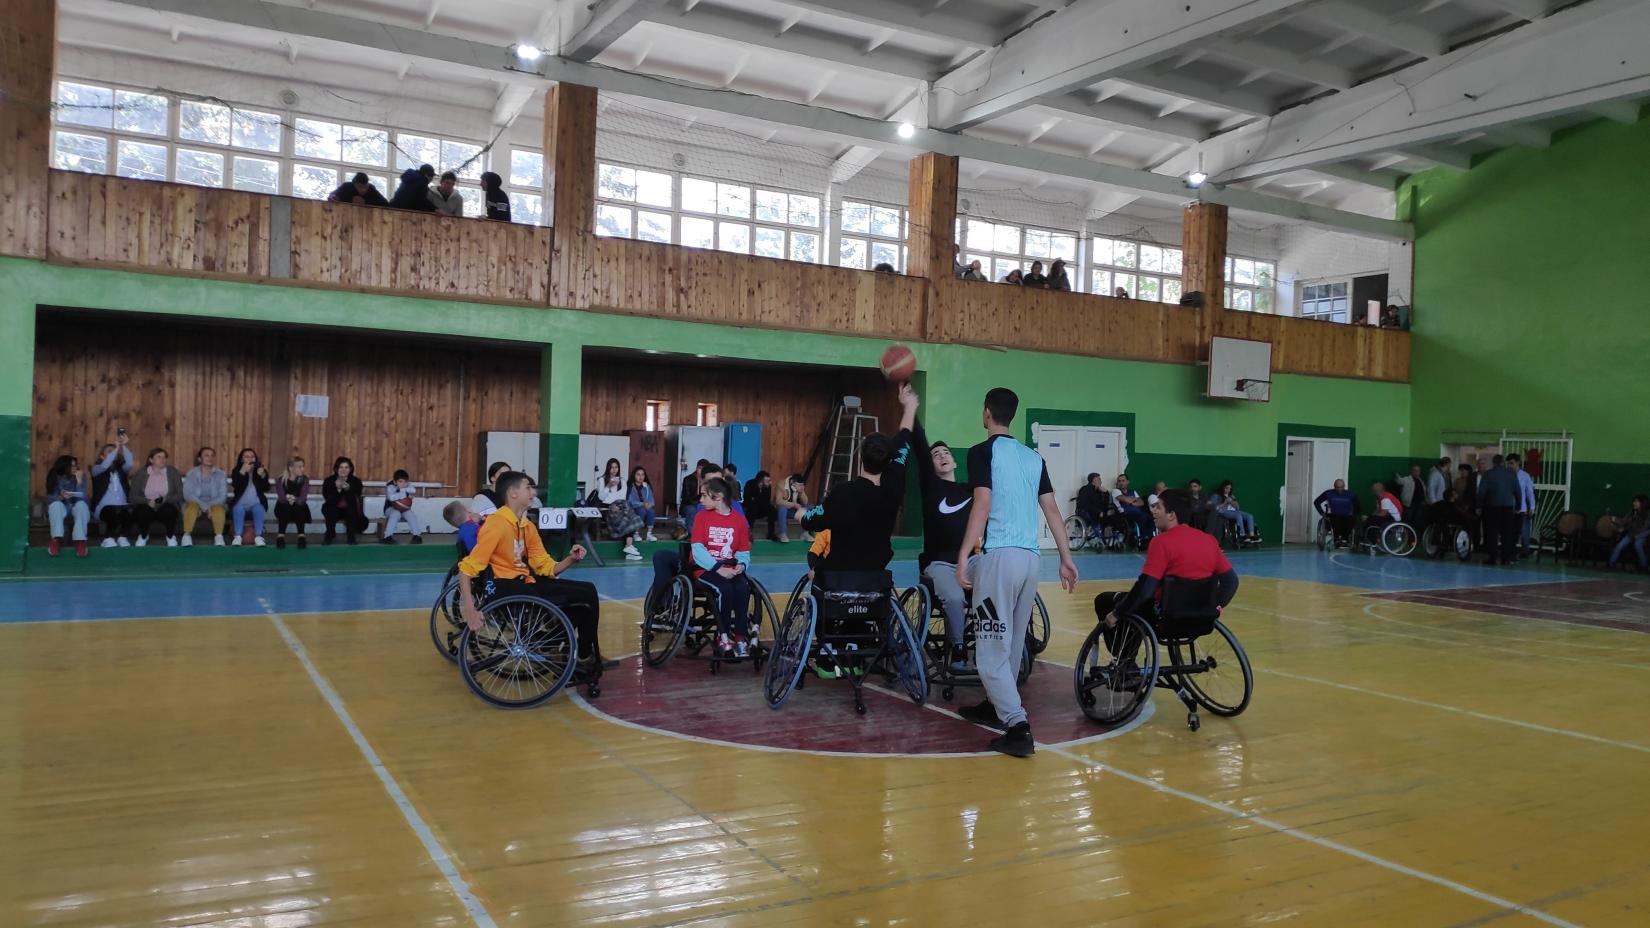 Athletes of the first children and young people wheelchair basketball club in Armenia, "Motus Vita" start their demonstration game.